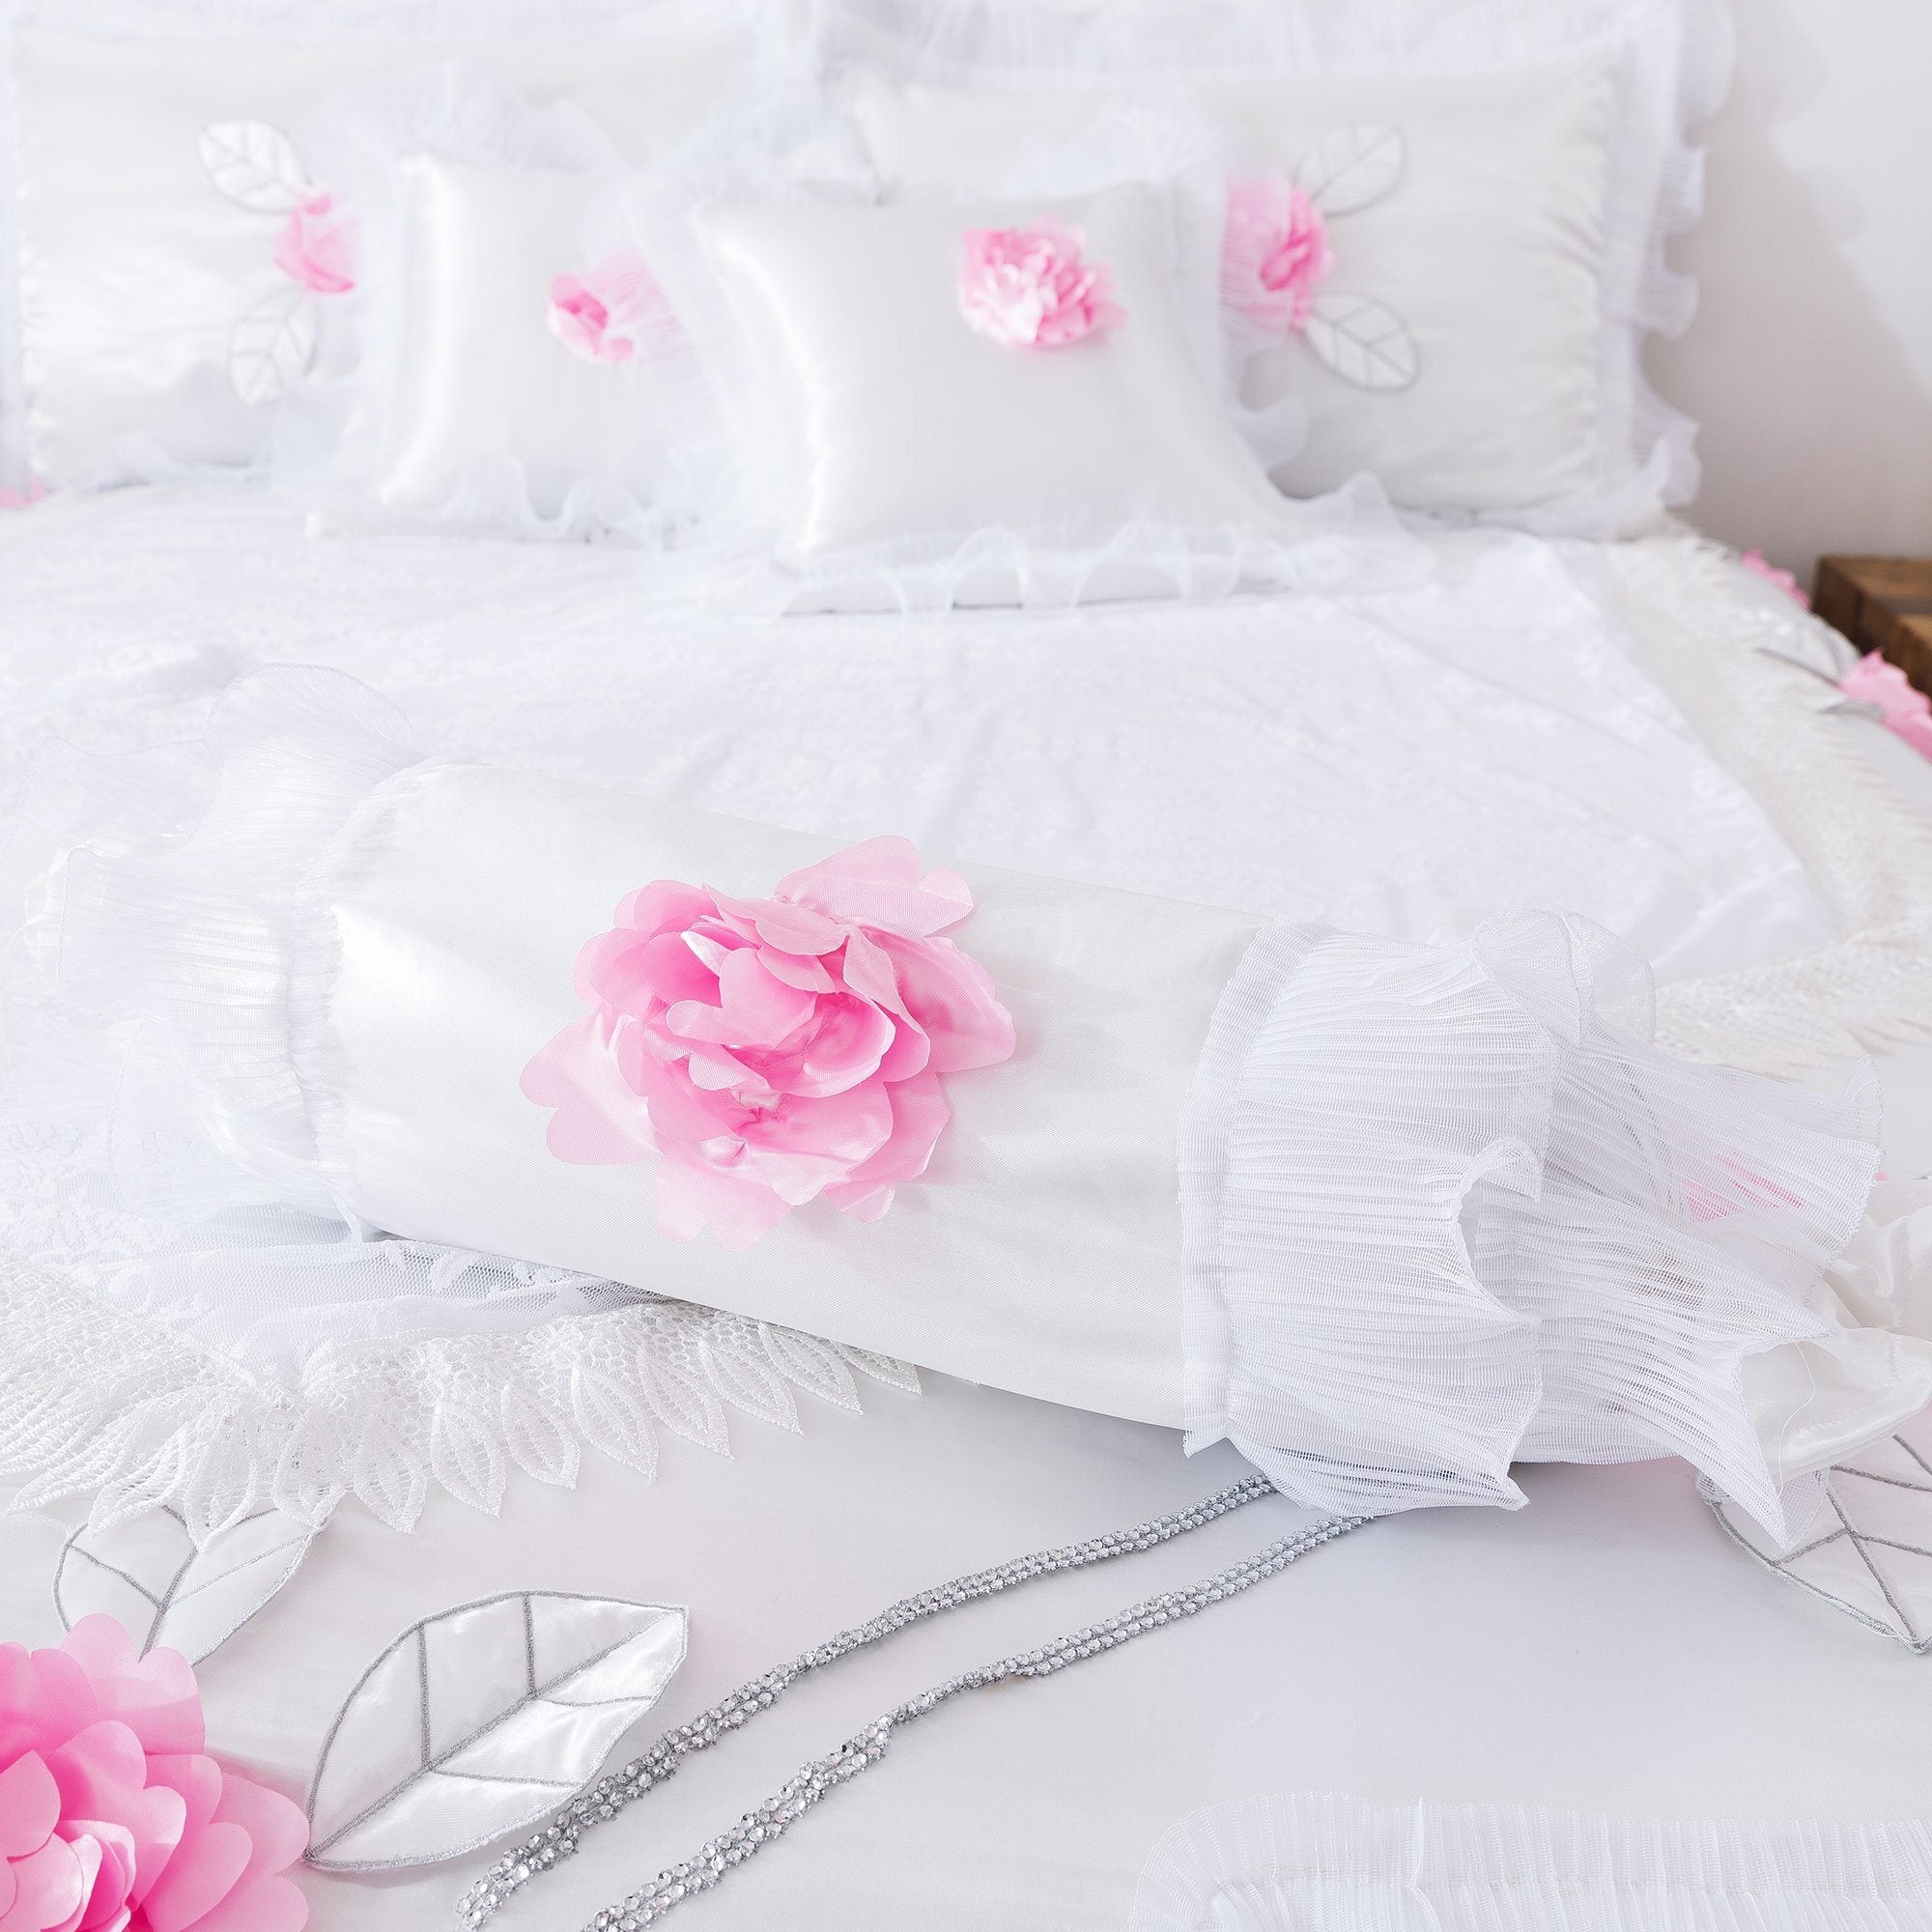 Tache Ruffle Floral Lace Satin White Pink Luxury Delicate Rose Comforter Set (MA125)